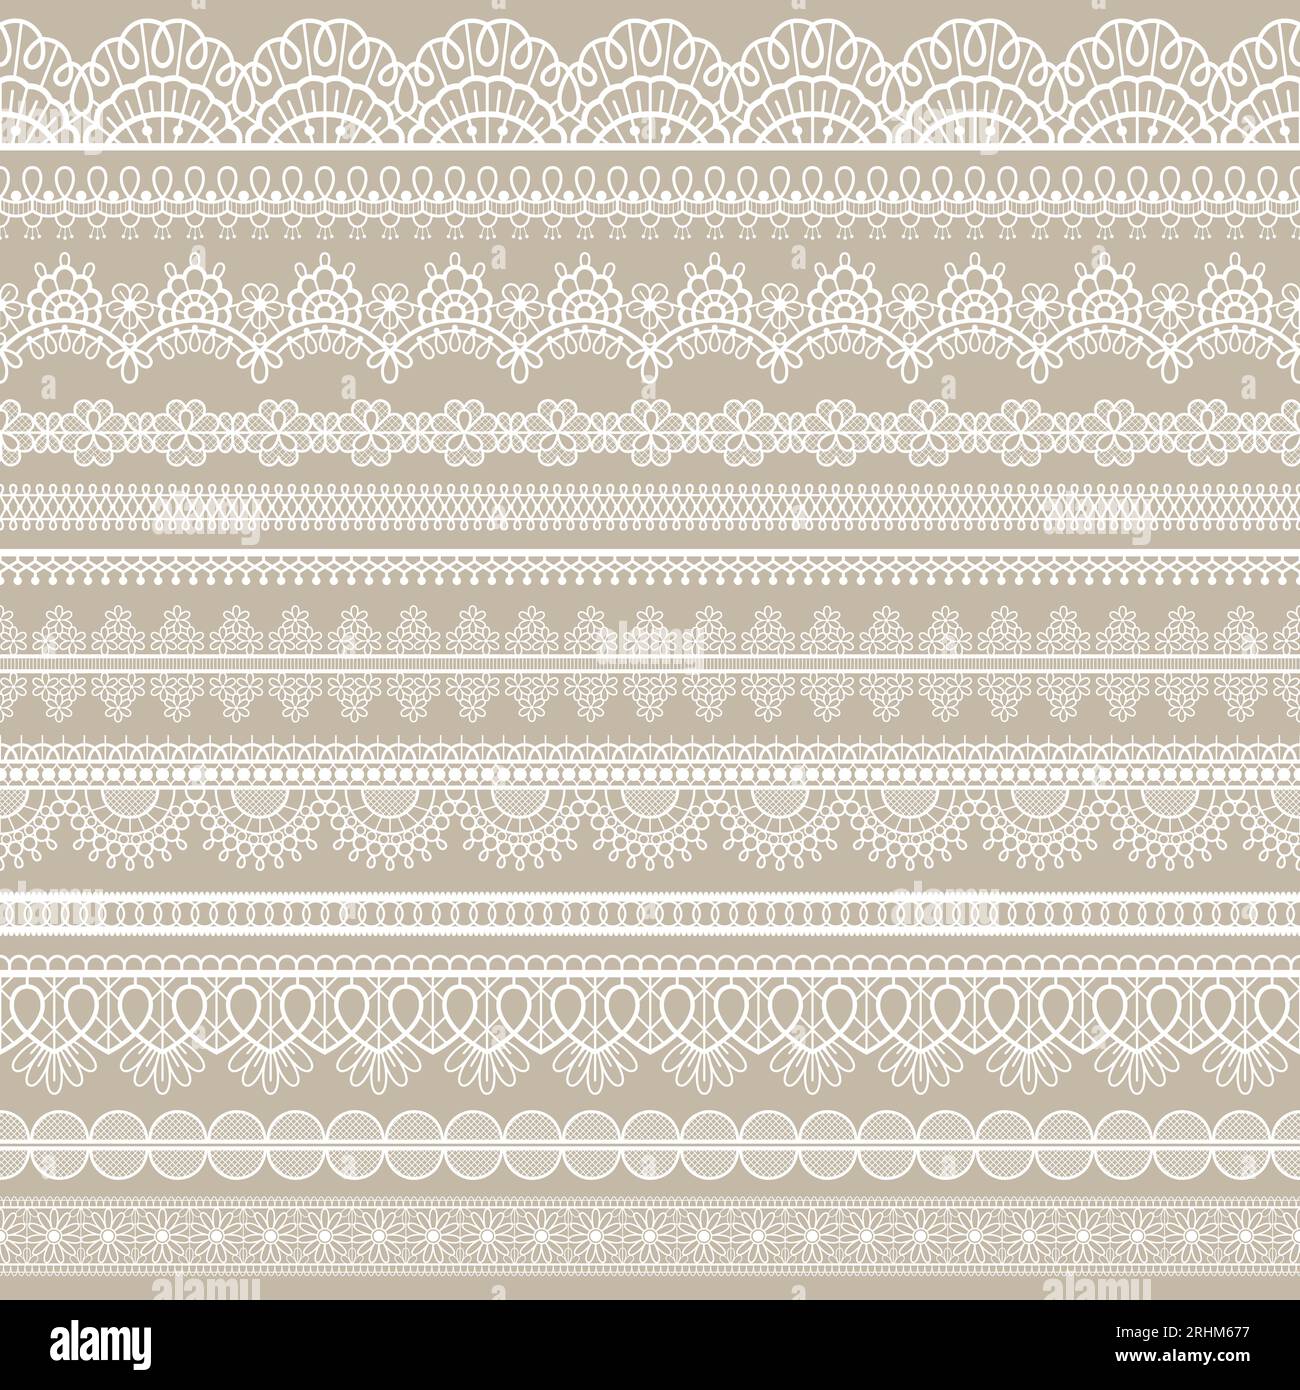 Lace seamless border. White cotton lace strips, embroidered